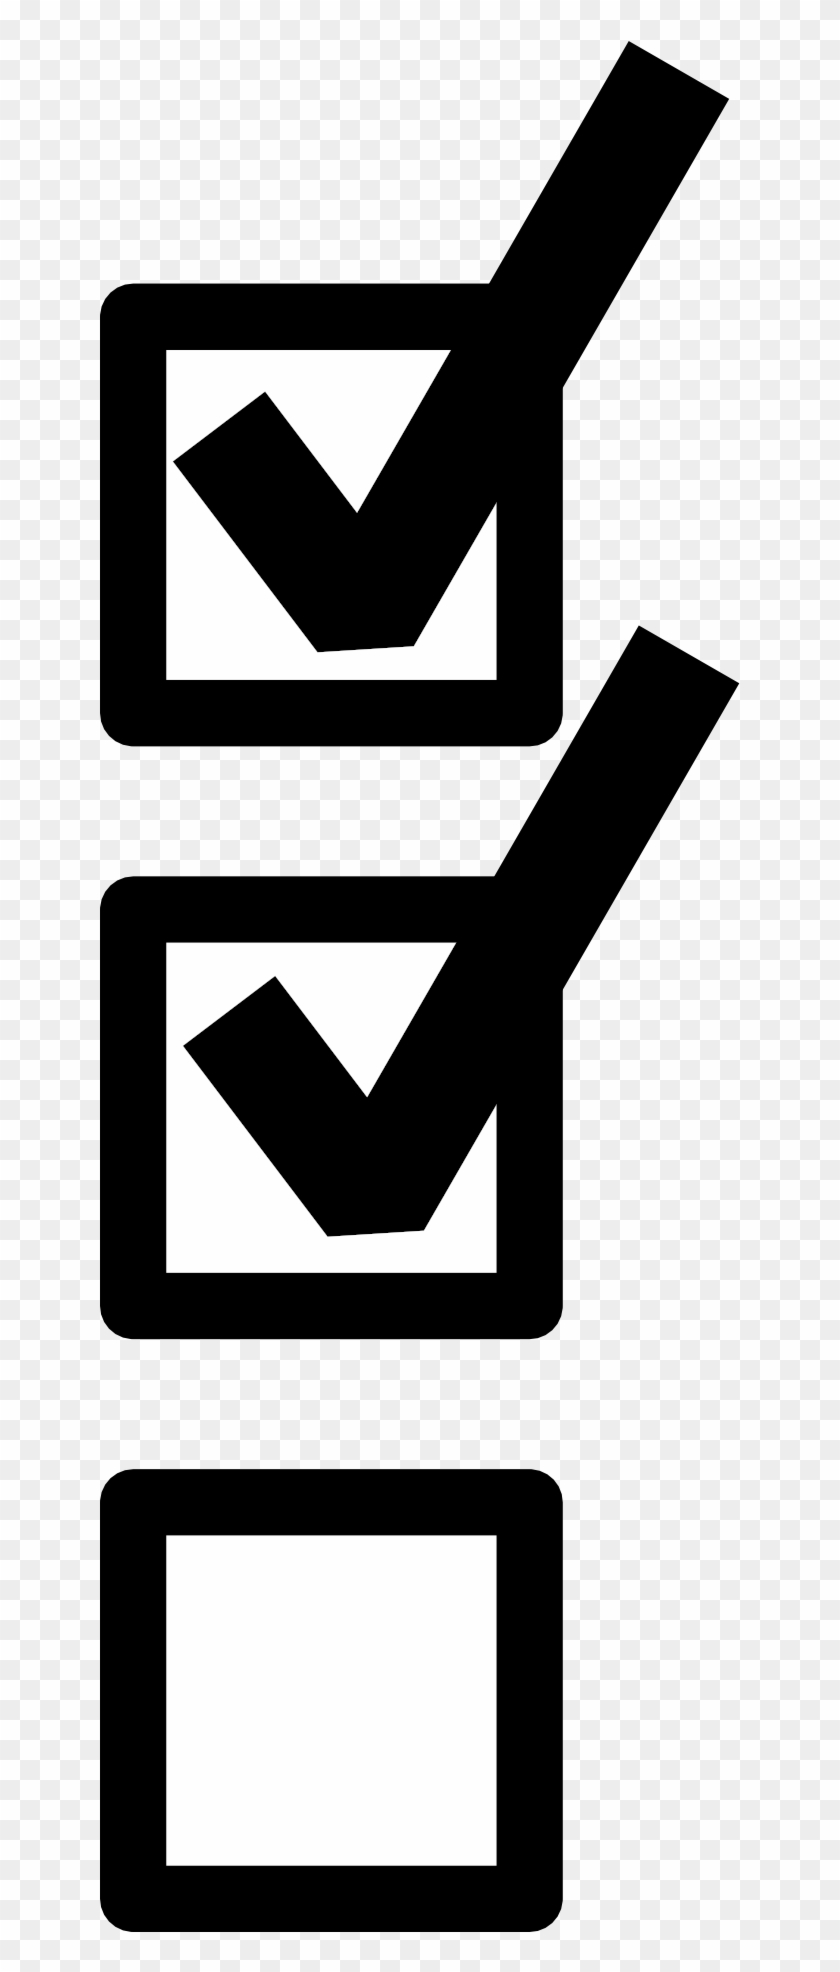 The School That Ticked The Box - Checklist Box Png #1638647